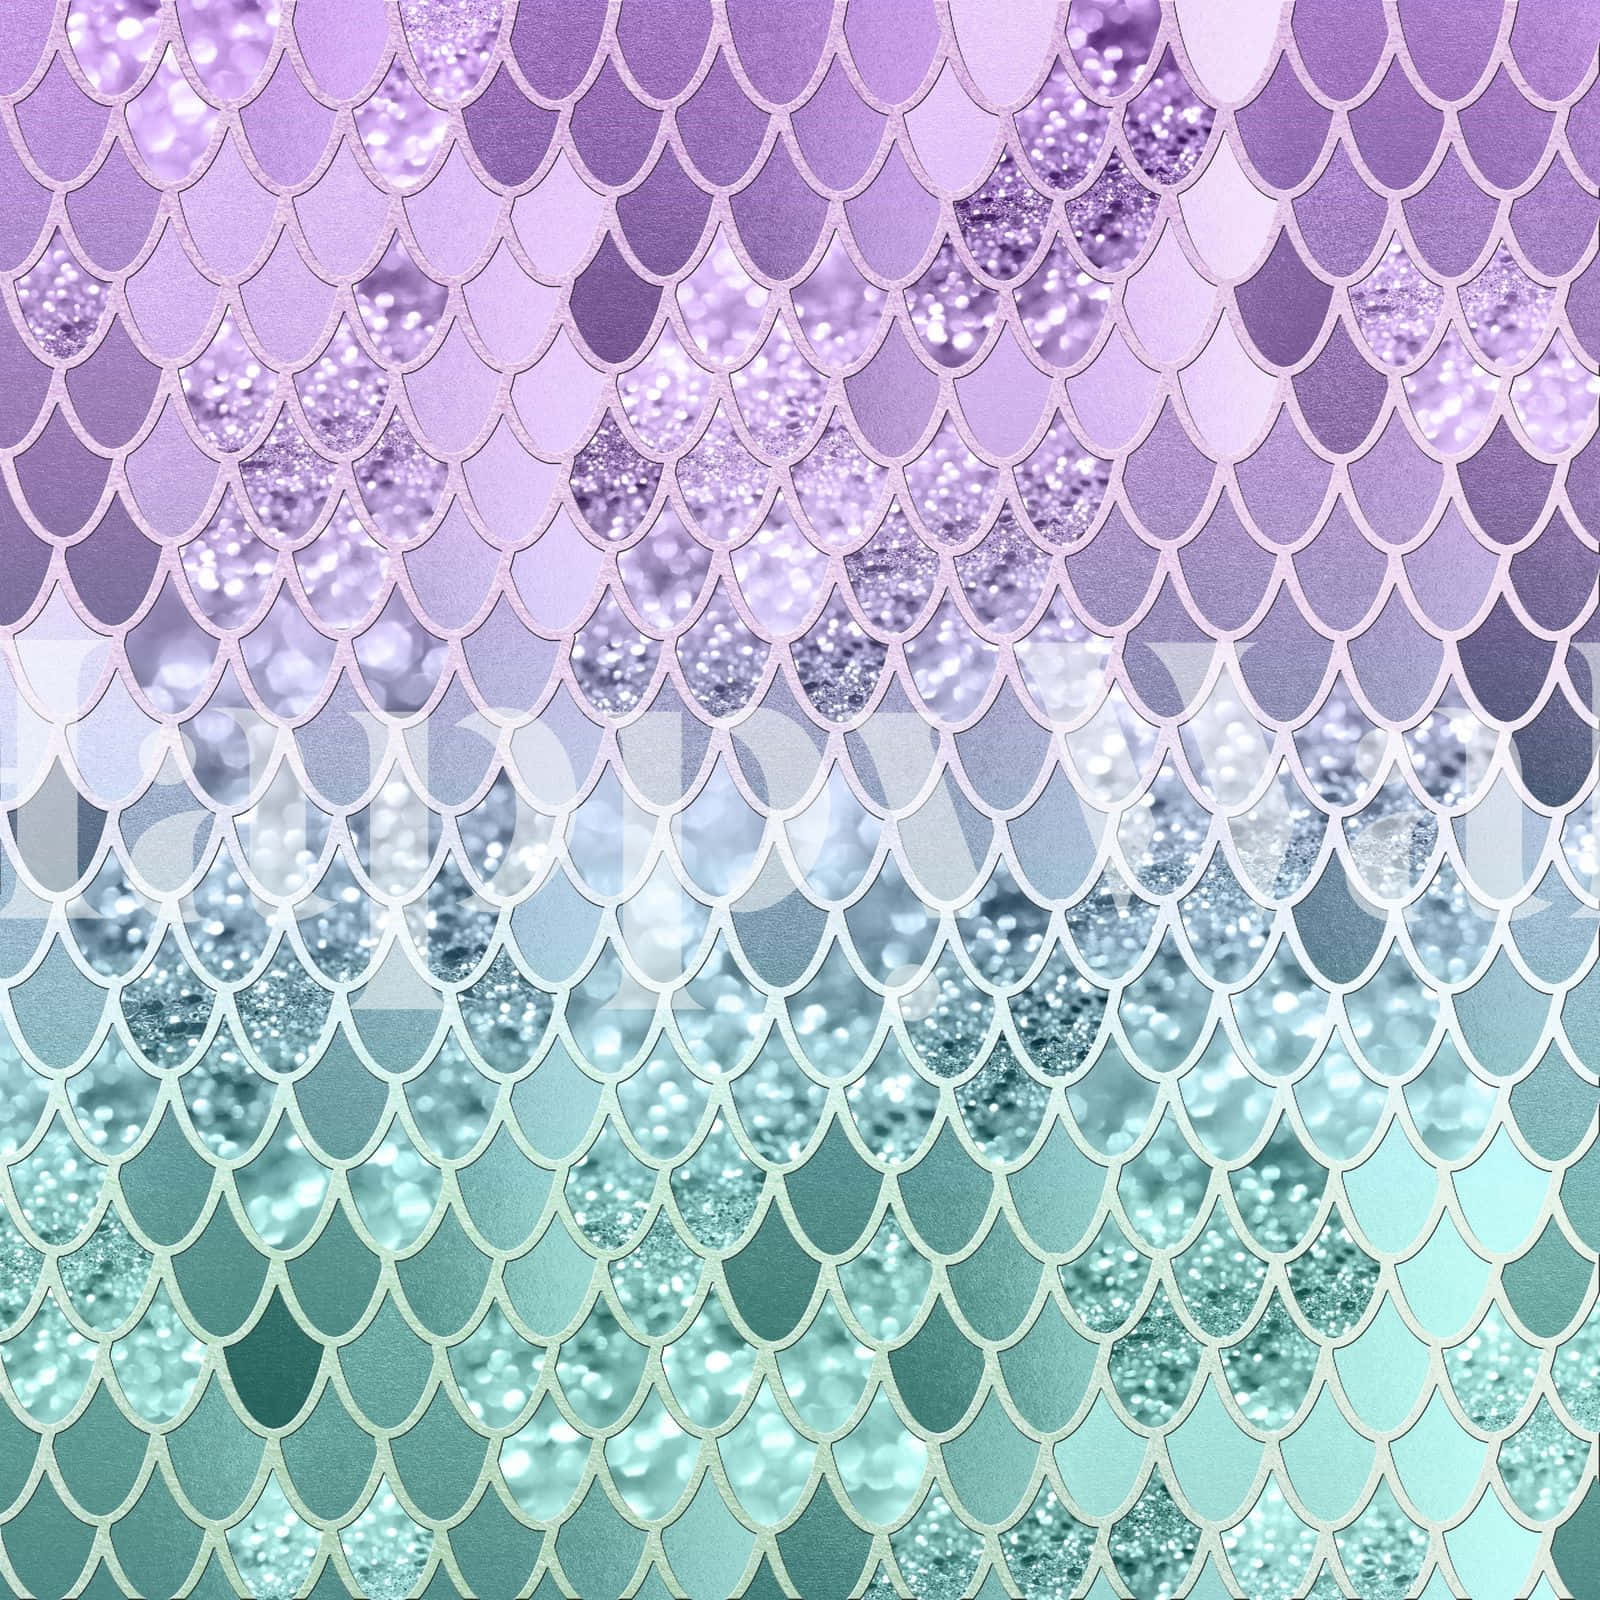 Mermaid Scales Background In Purple And Turquoise Wallpaper